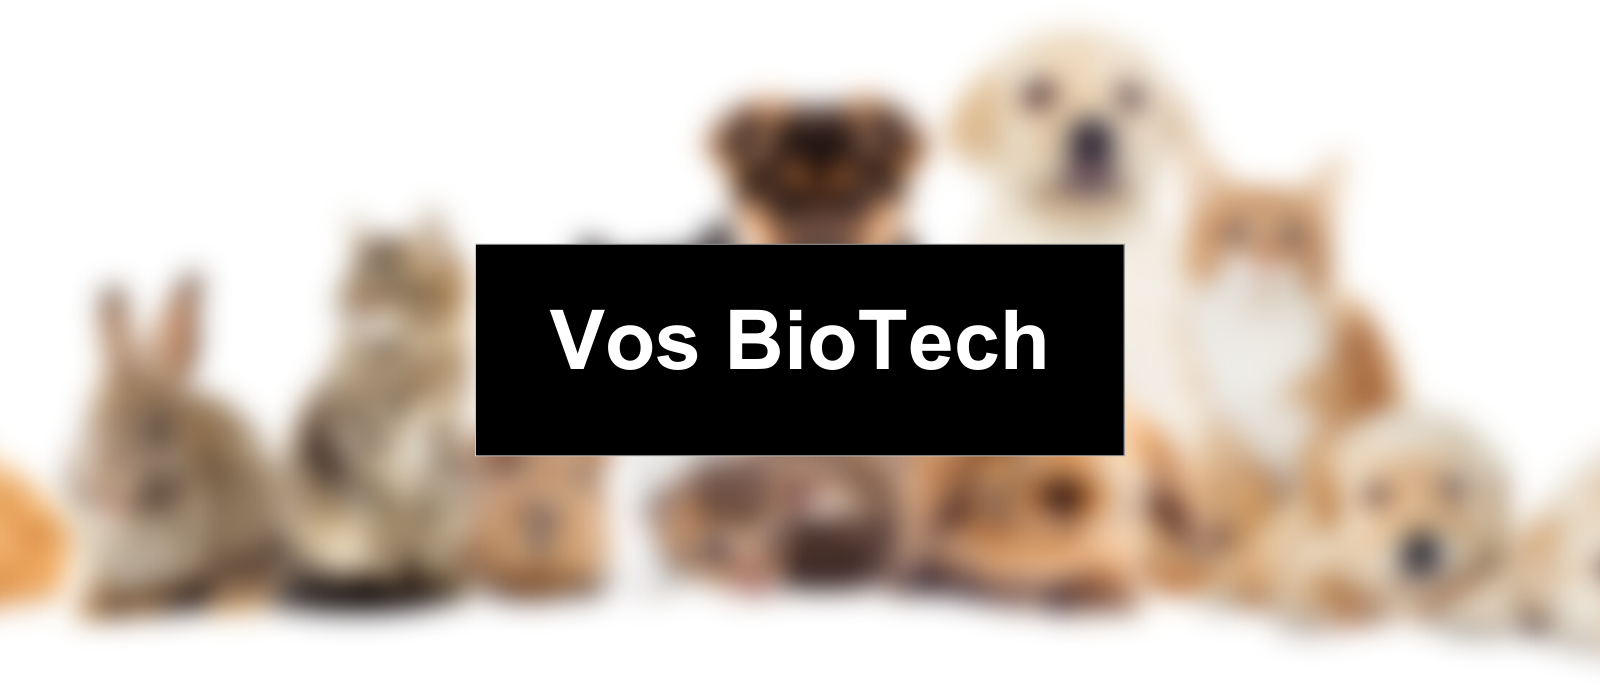 HGP & Federal Equipment To Conduct Massive Sale From Vos Biotech’s Veterinary Biologics Site